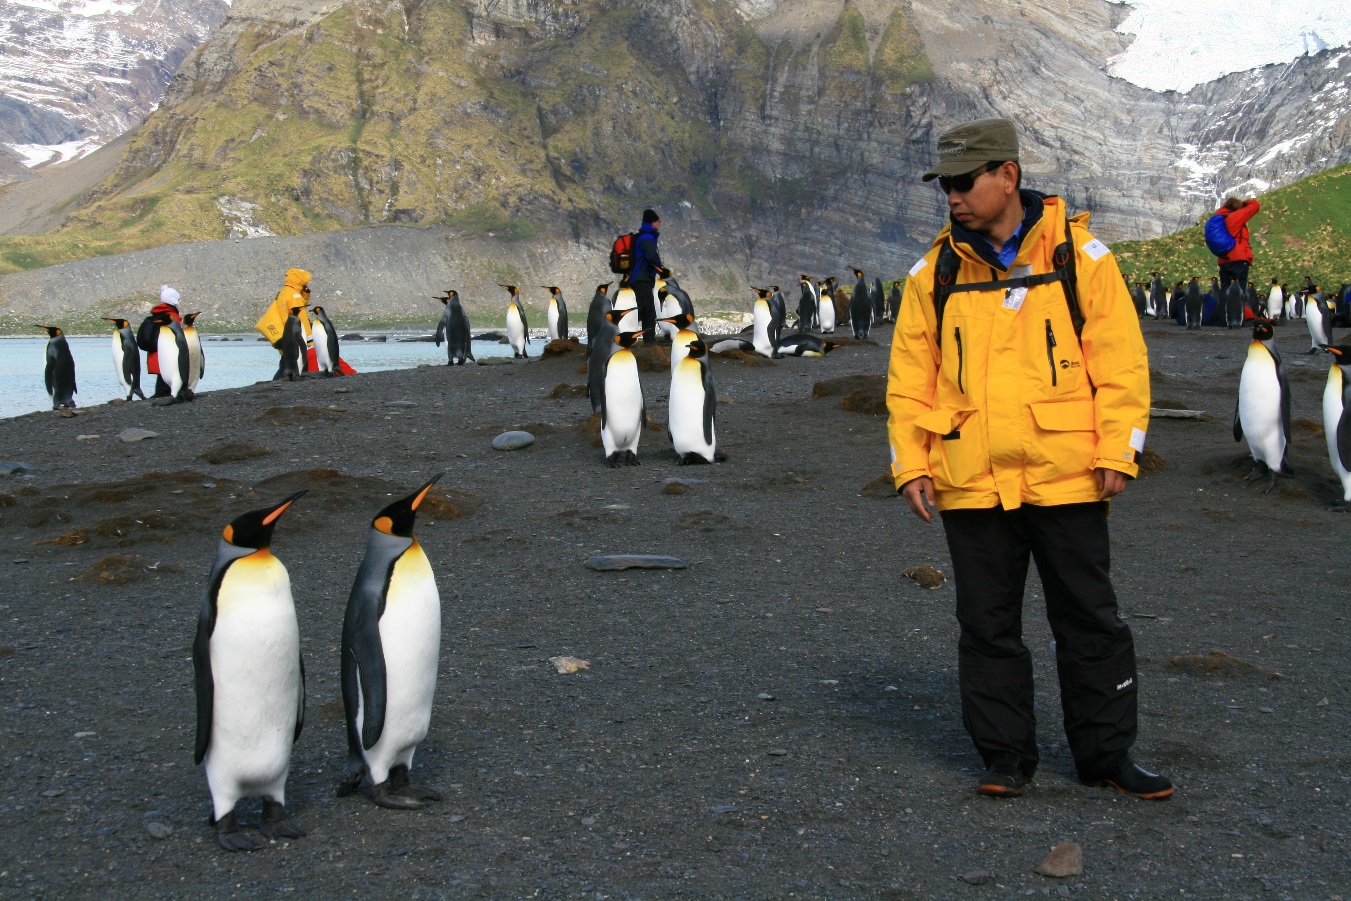 Li Dongfei, one of G&G leaders, gets up close to friendly Emperor penguins in Antarctica